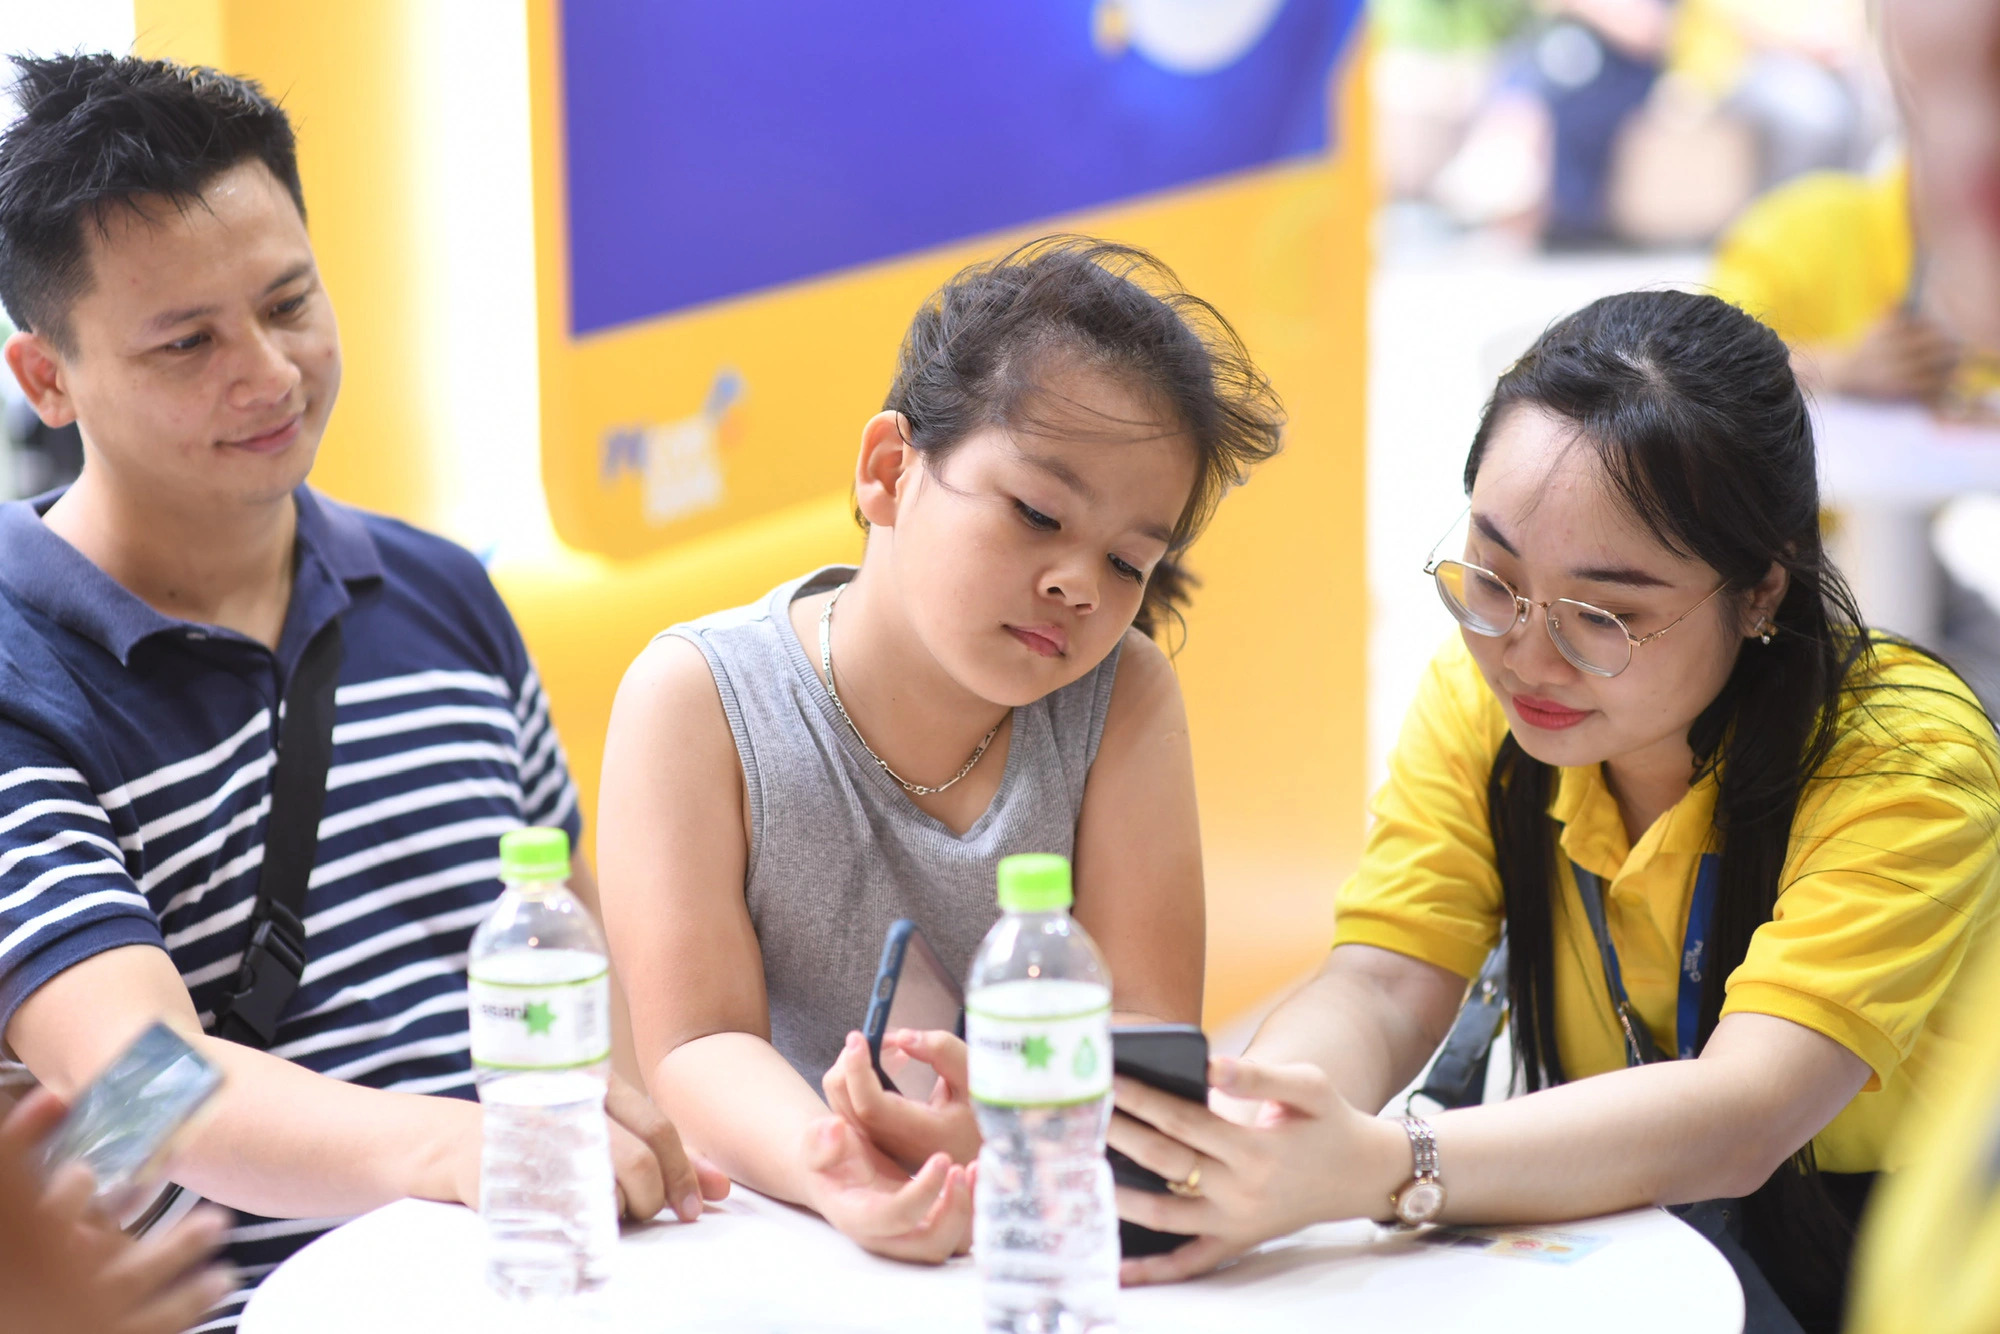 A child visitor experiences a digital payment service at the event. Photo: Quang Dinh / Tuoi Tre